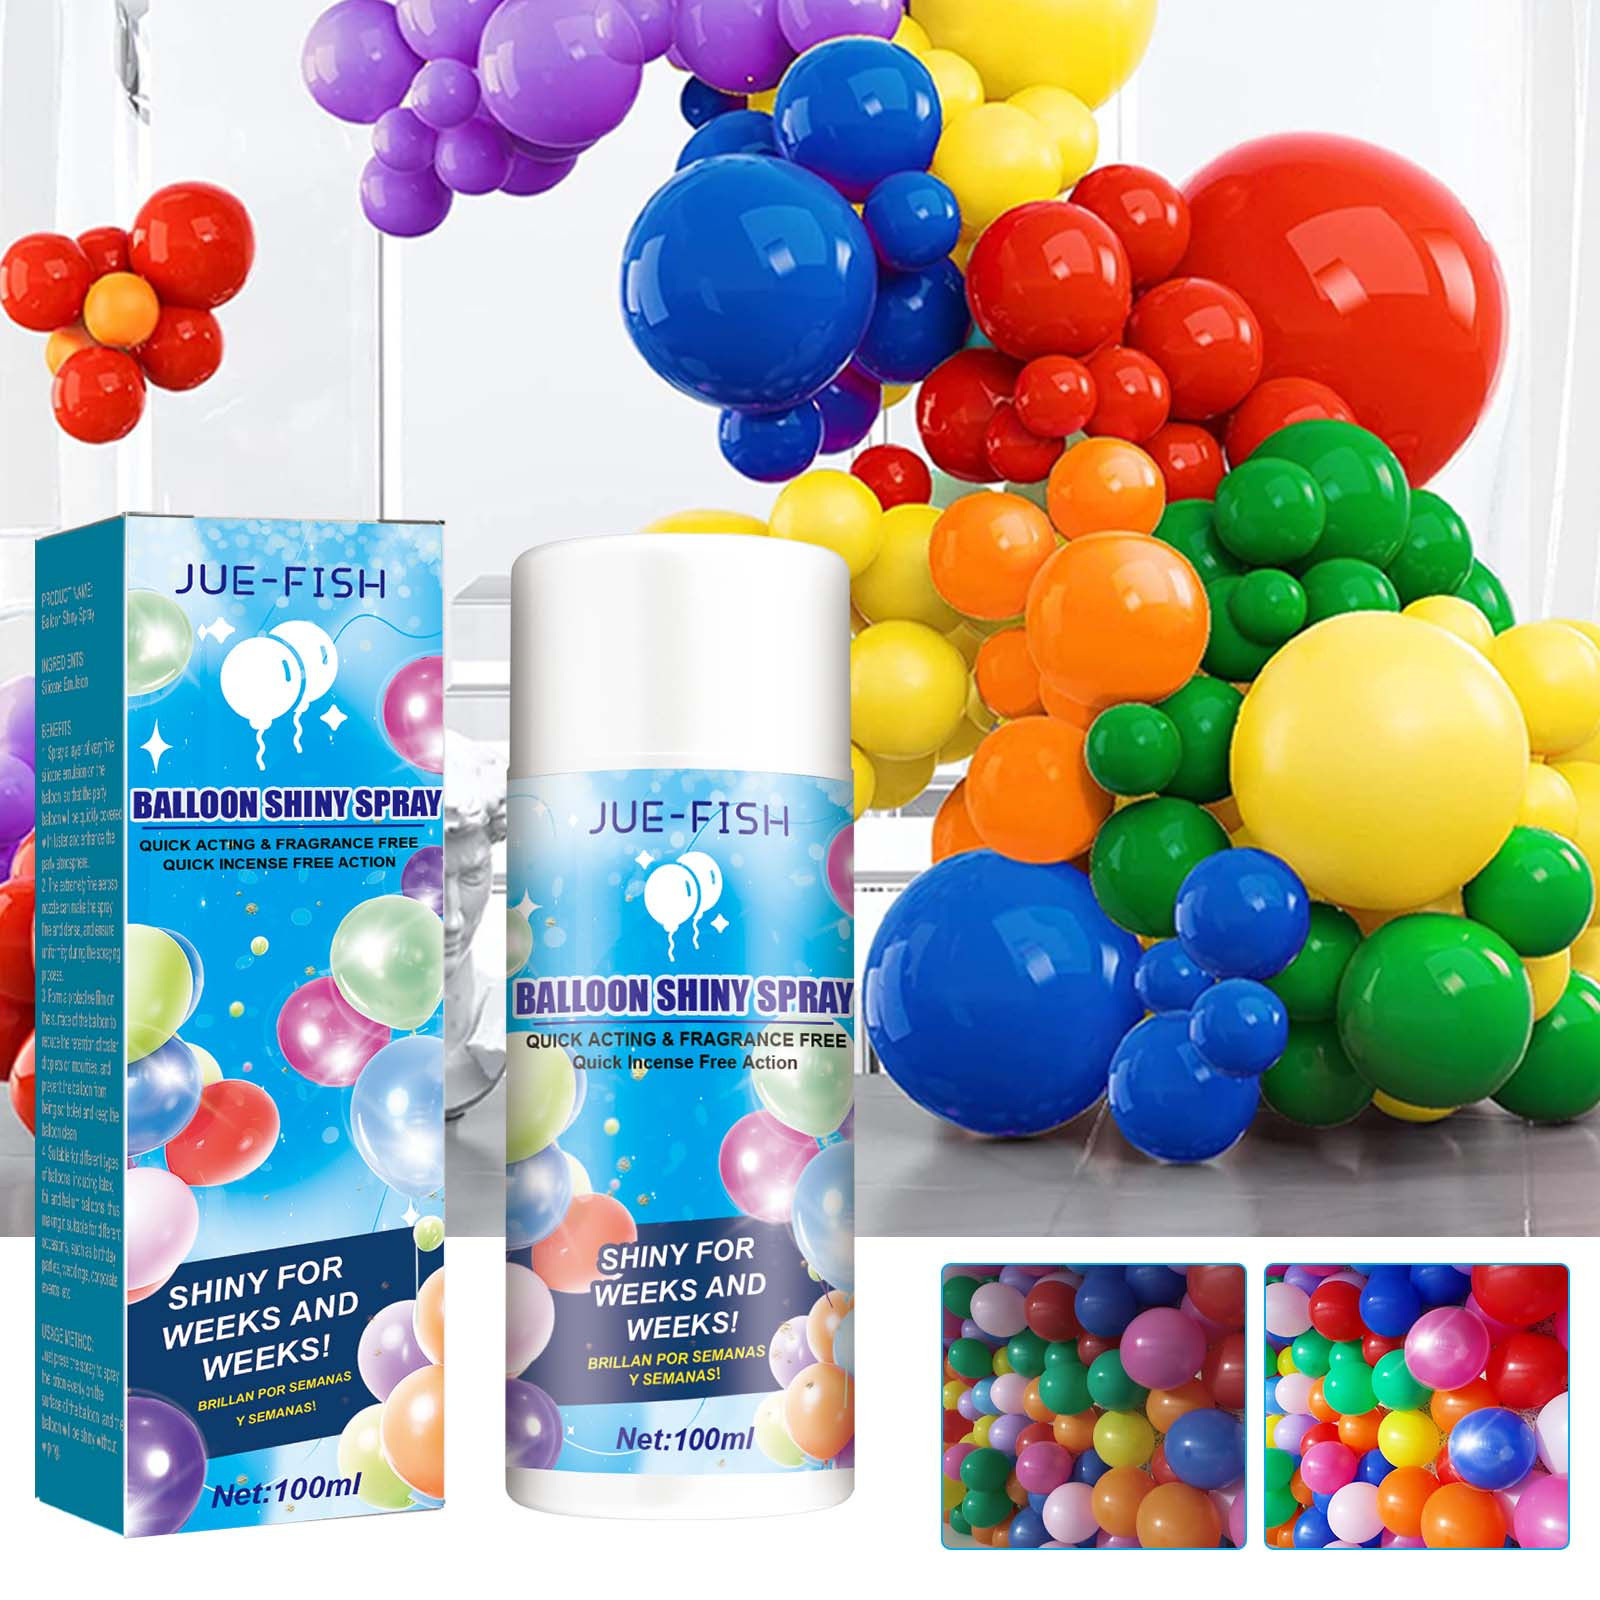 3.38 oz JUE-FISH Balloon High Shine Spray for Latex Balloons - Balloon  Spray Shine for an Elegant Hi Gloss Finish in Minutes - Specially  Formulated